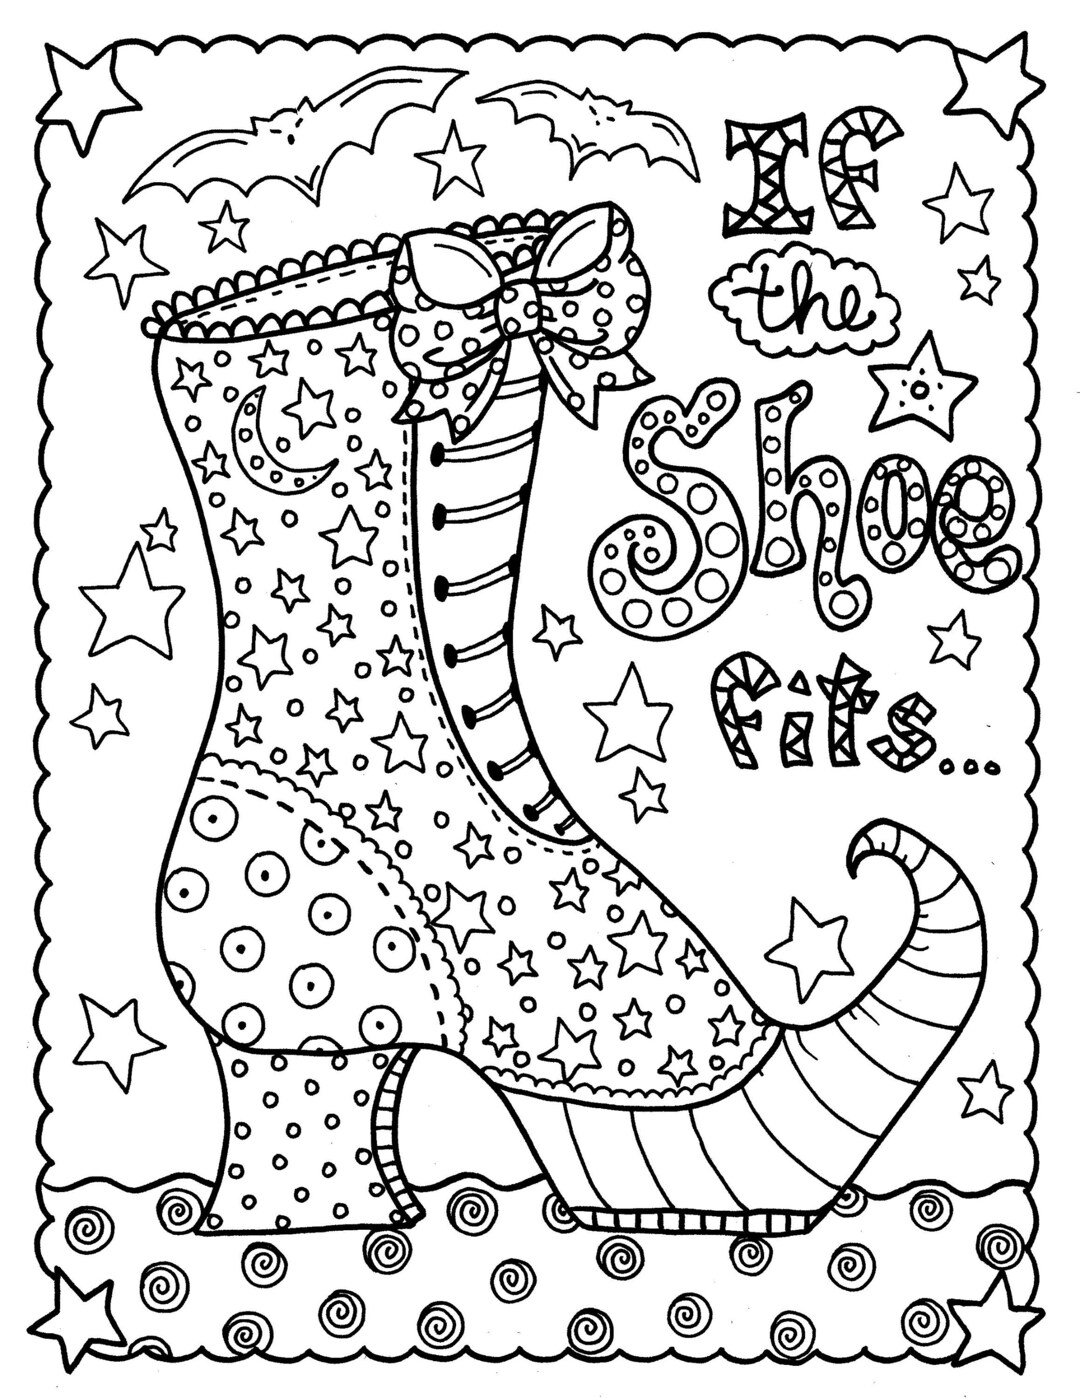 Digital download witch shoe halloween coloring page instant download digital fun coloring adult coloring